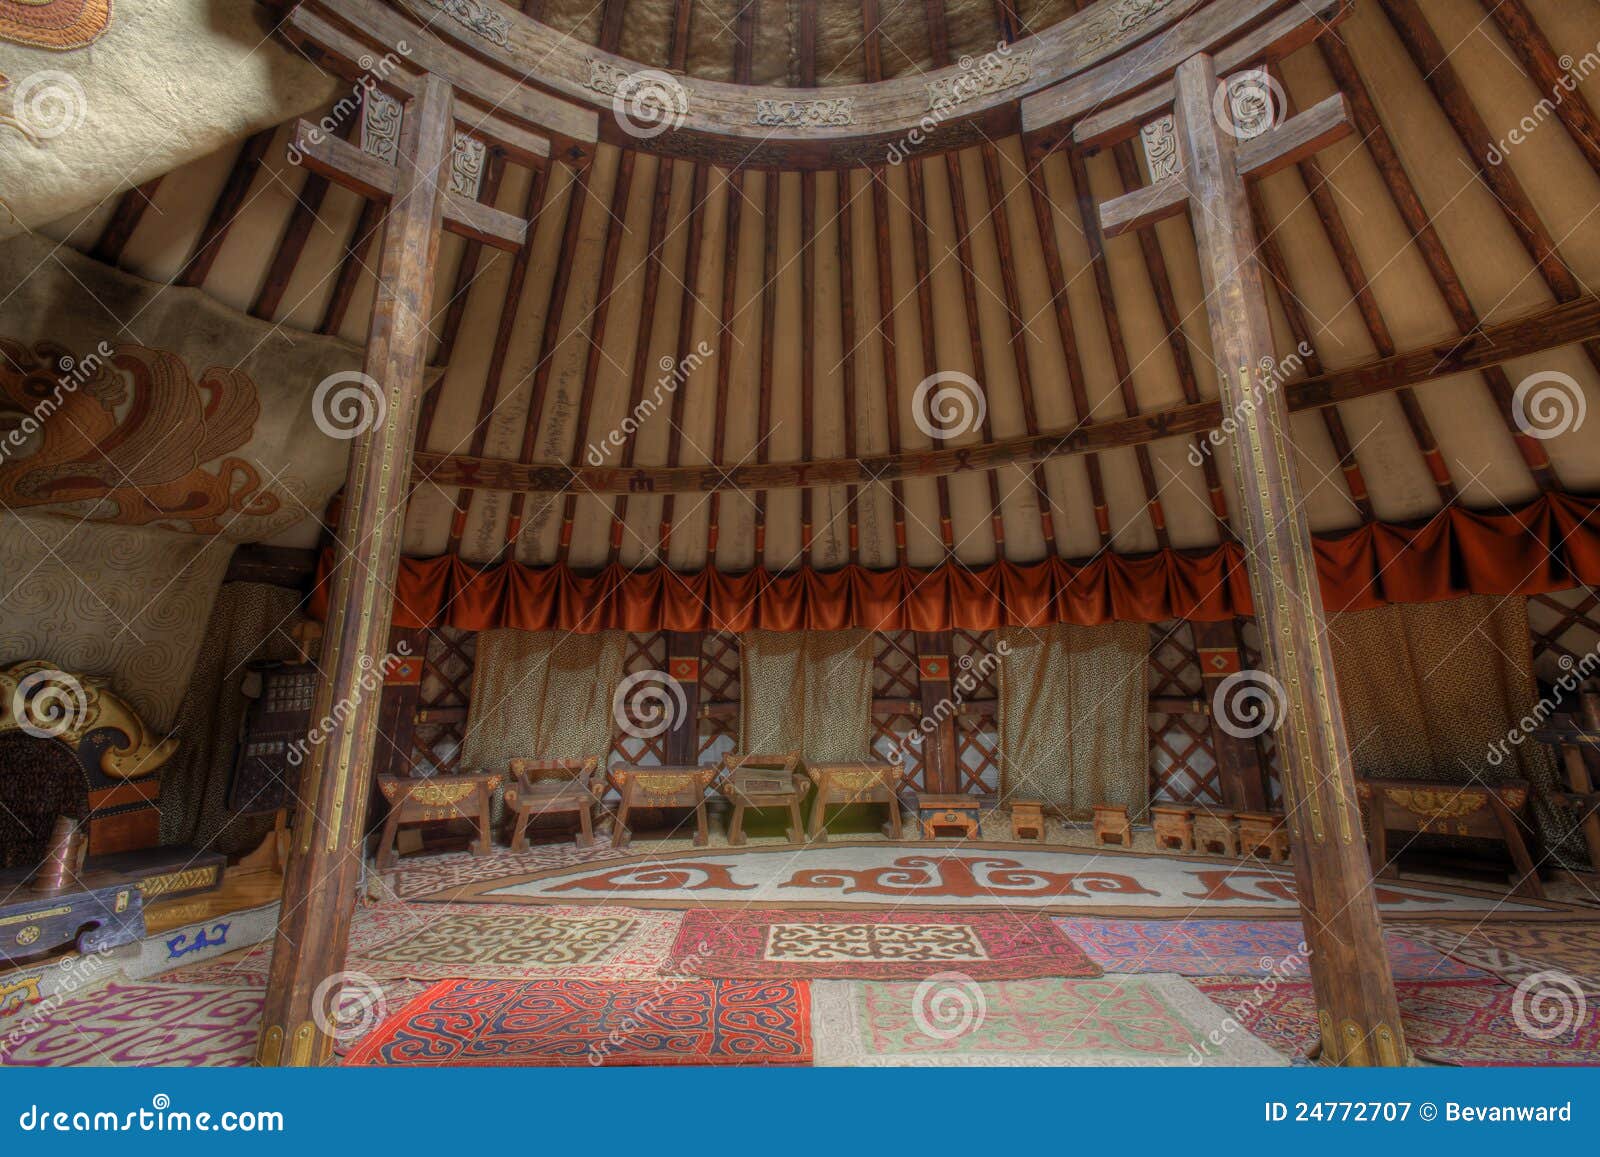 interior of king's grand ger in mongolia